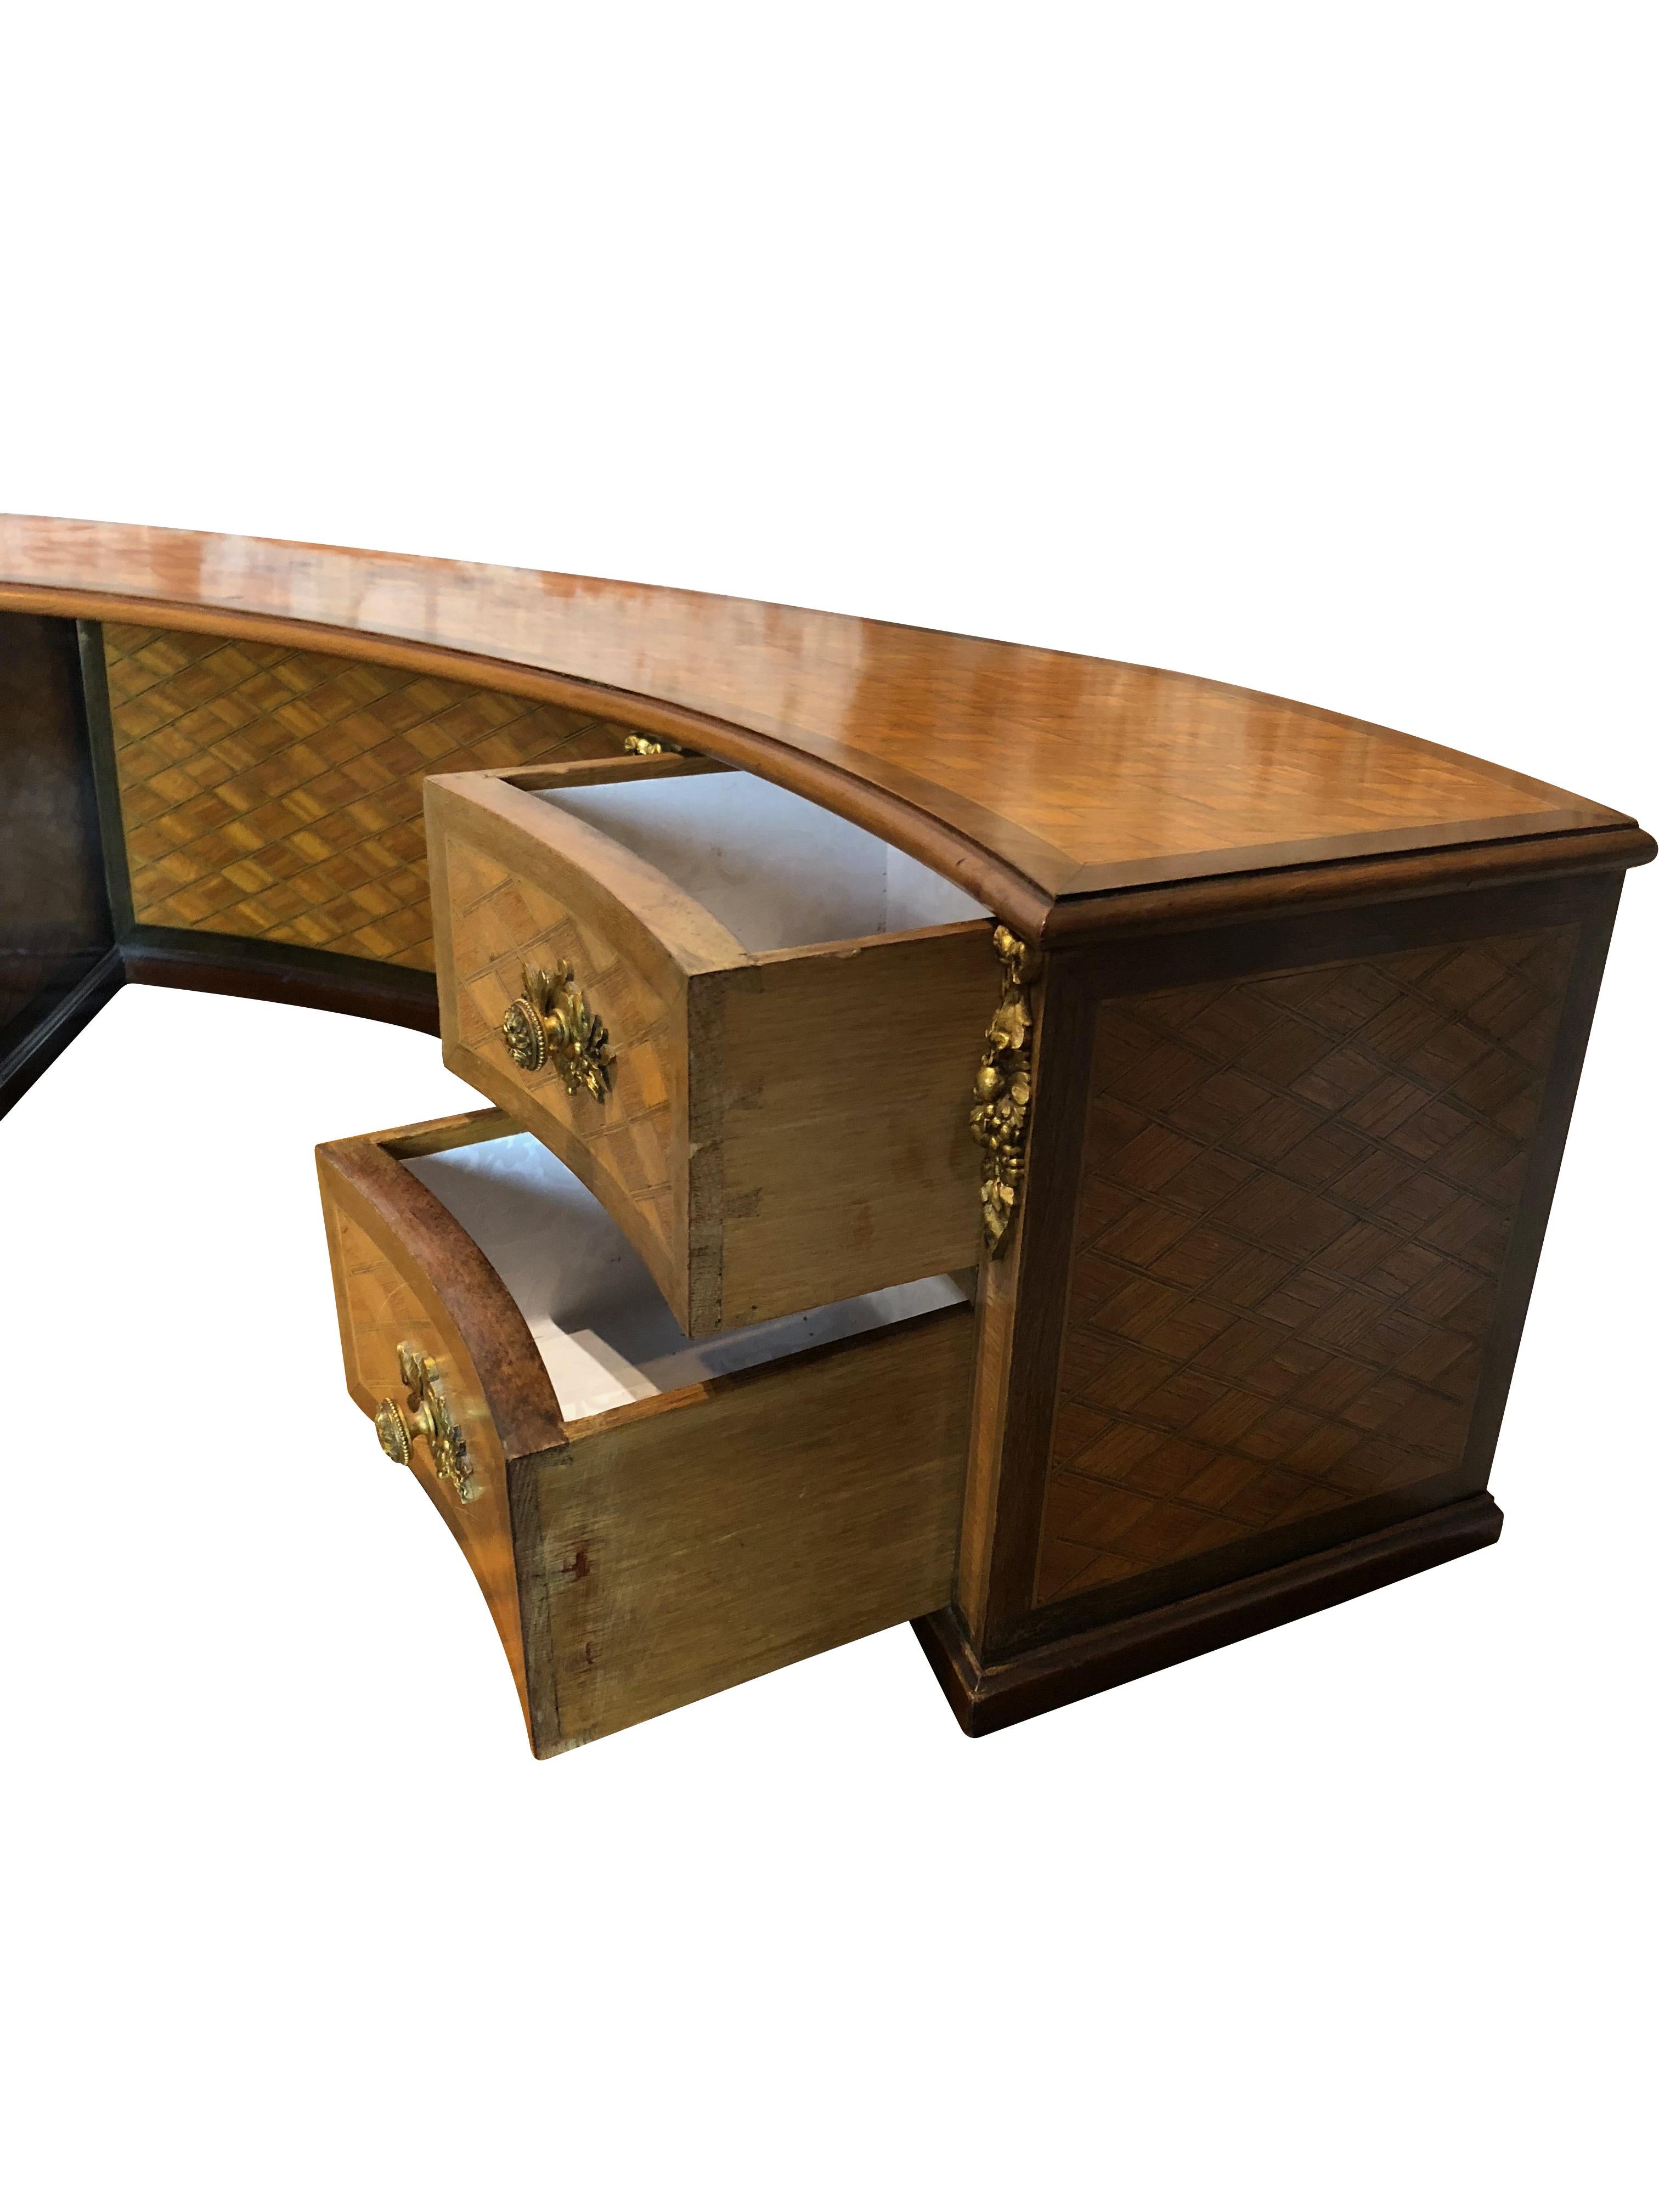 19th Century French Louis XVI Style Kidney Shaped Desk 2